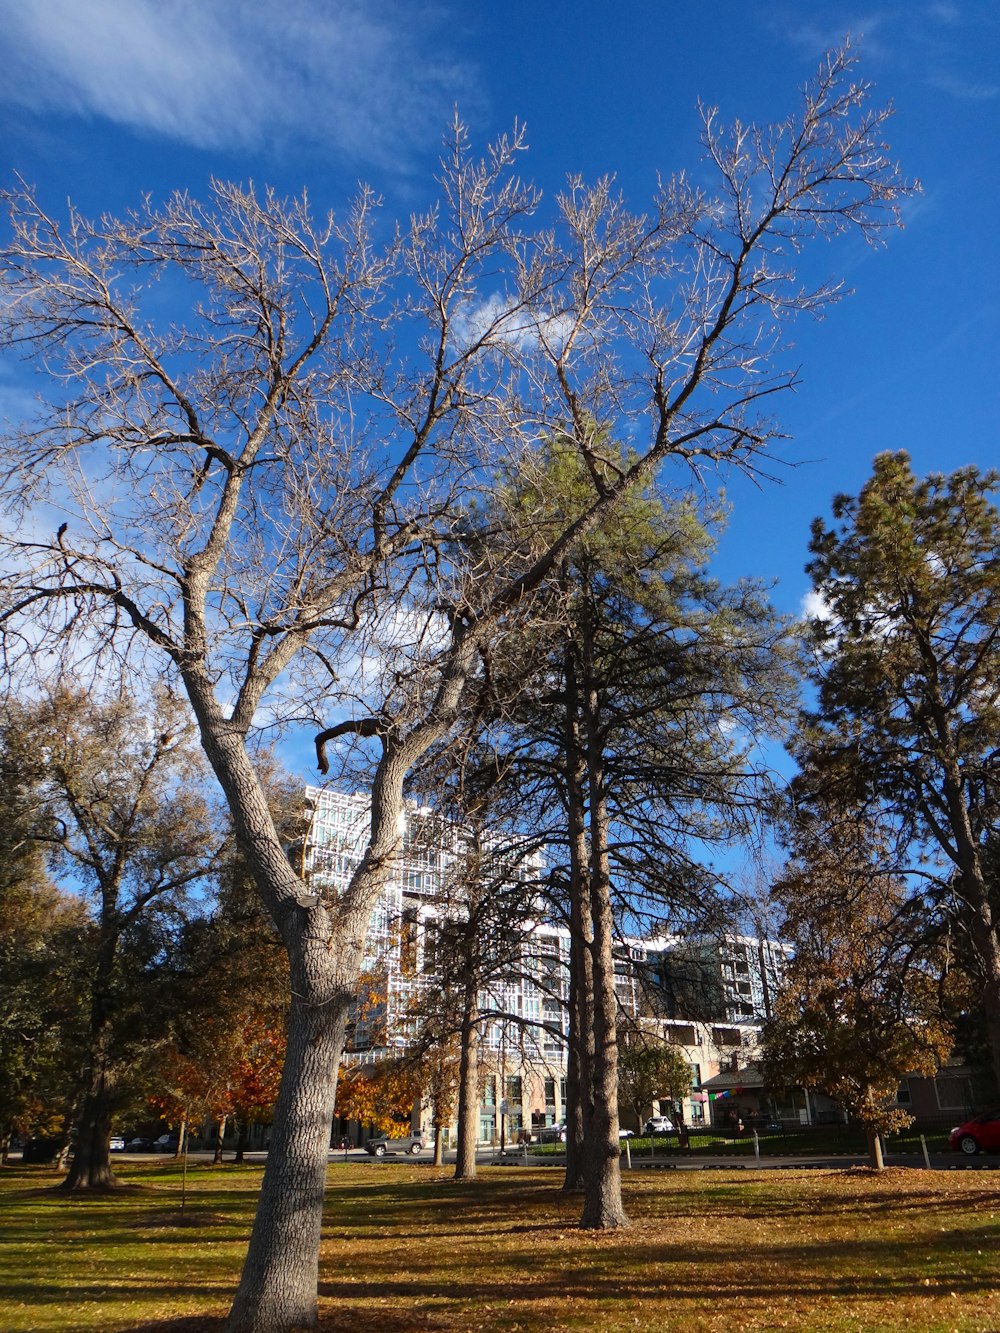 a park with trees and a building in the background